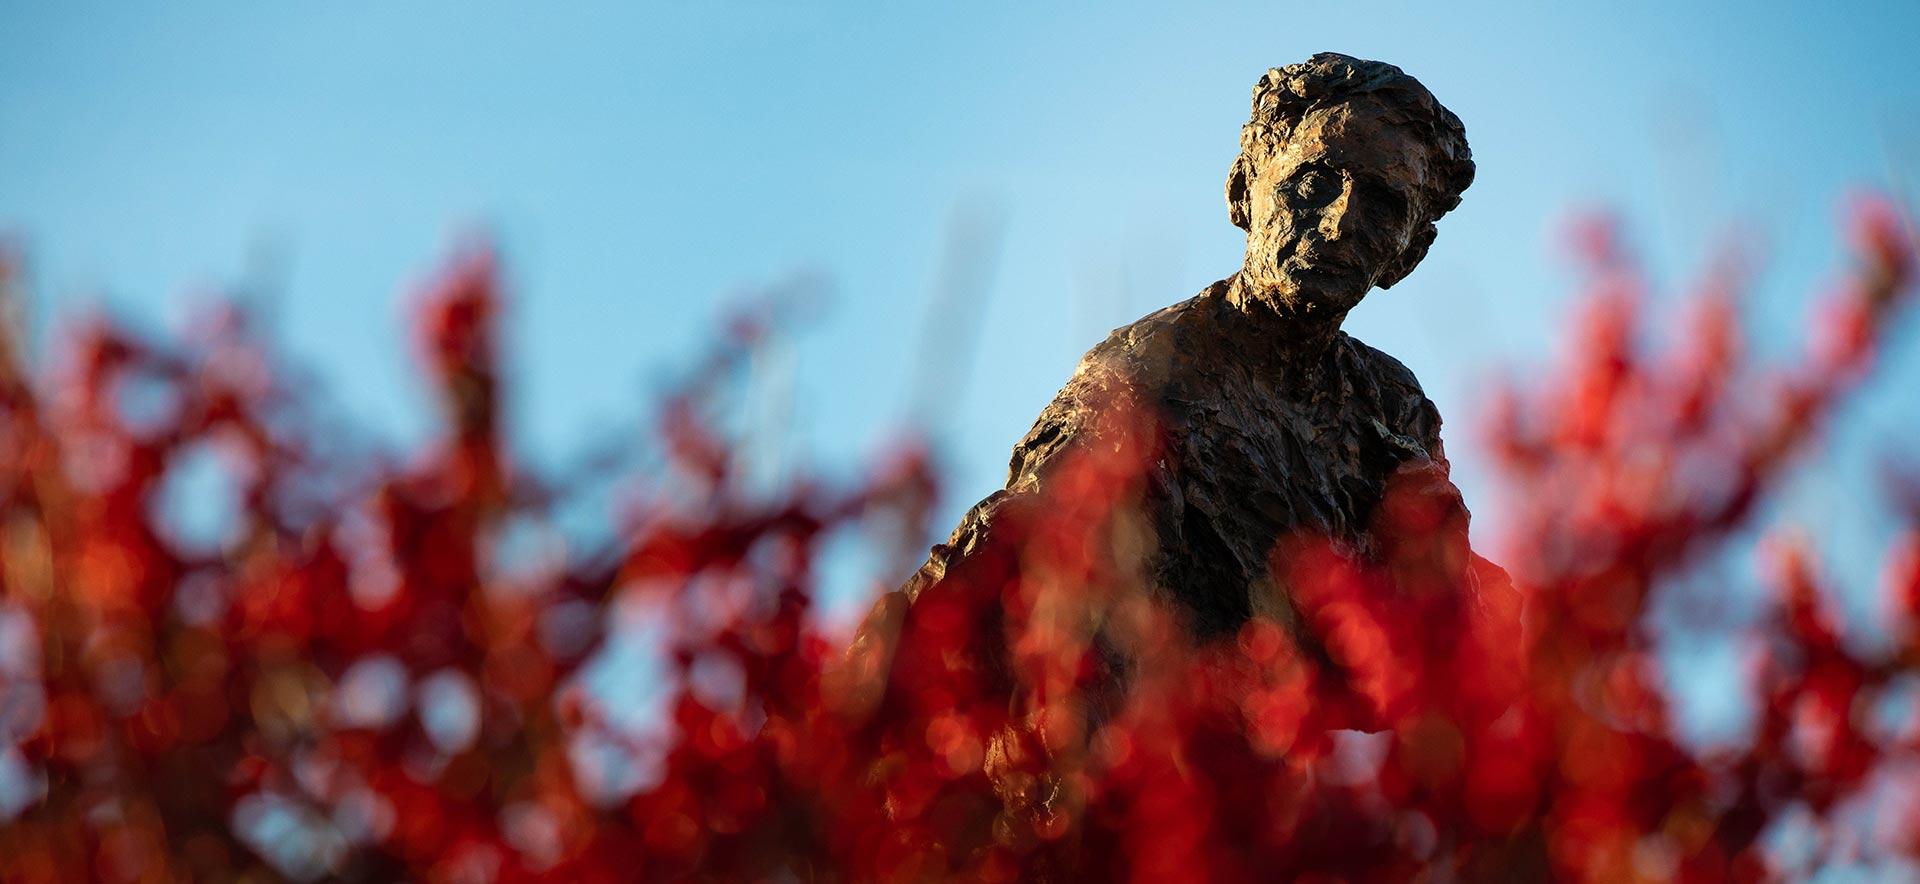 Louis Brandeis statue with red flowers in the foreground